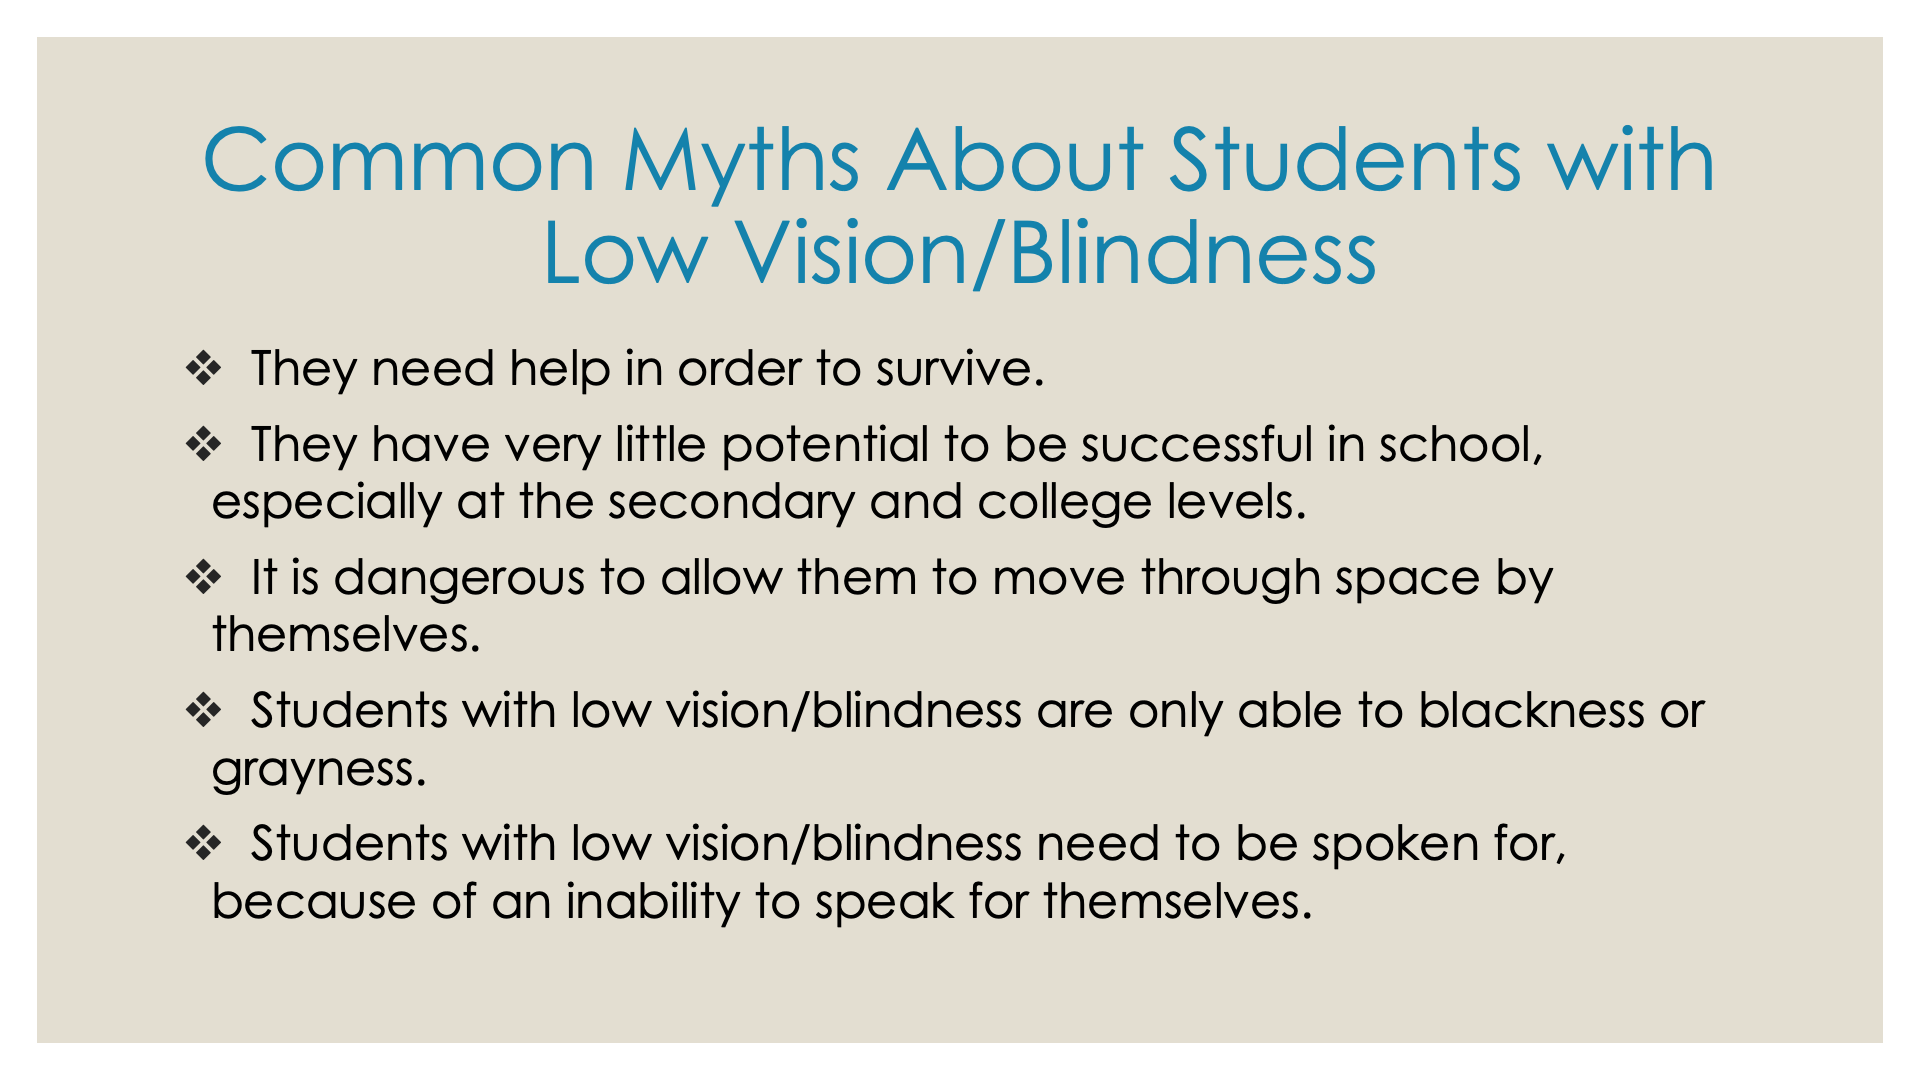 Common Myths About Students with Low Vision/Blindness